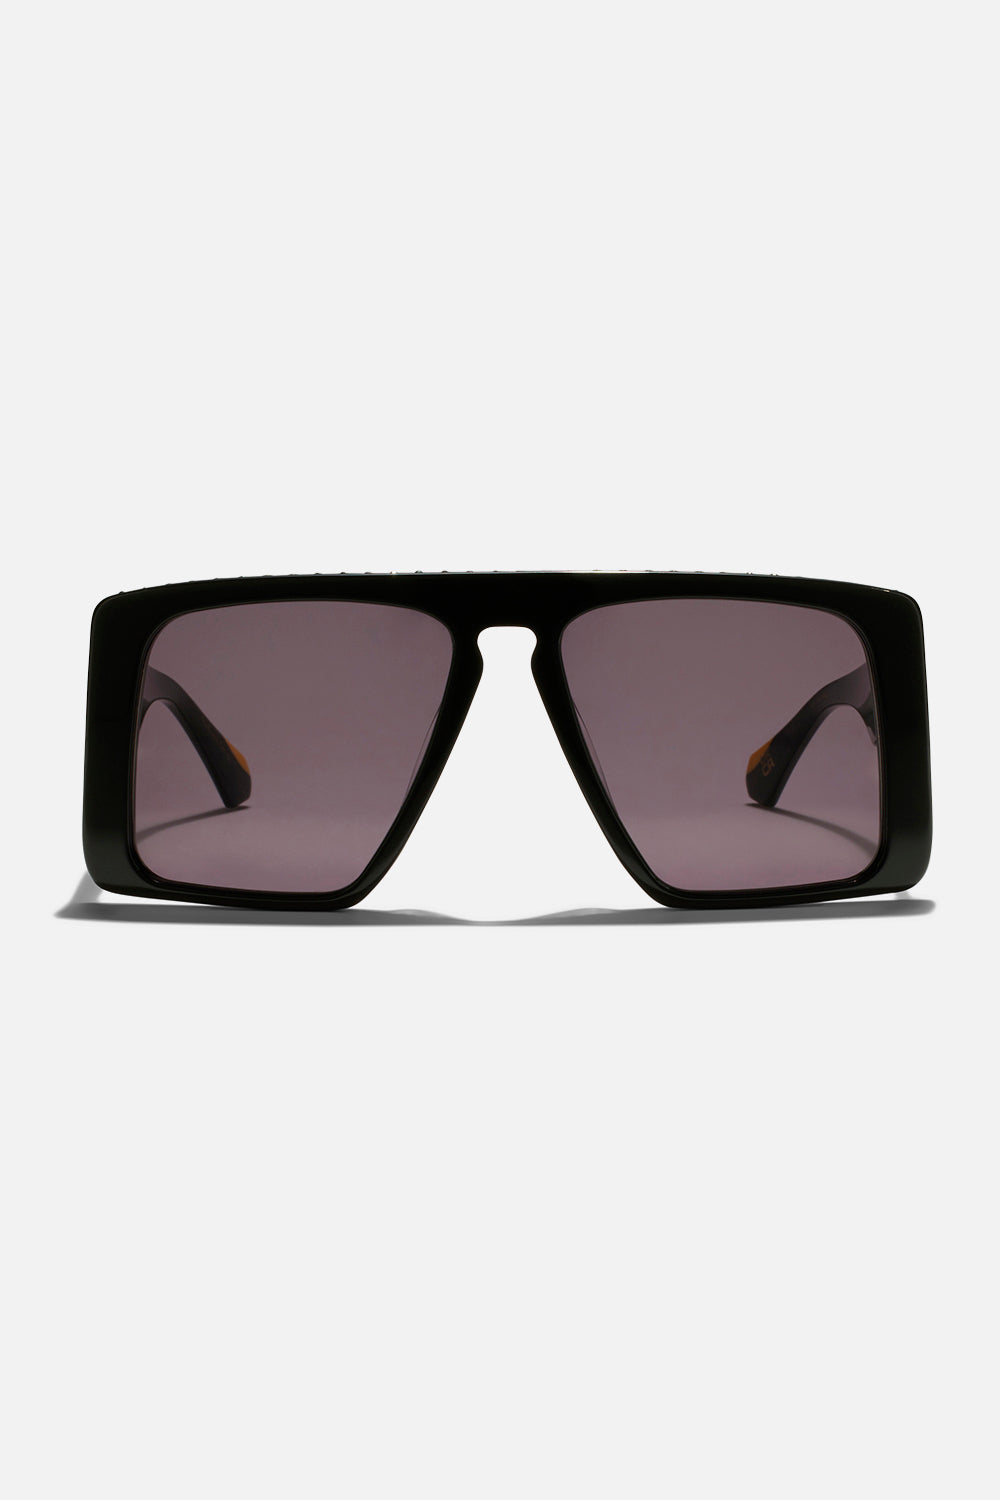 FULLY BOOKED
SUNGLASSES SOLID BLACK